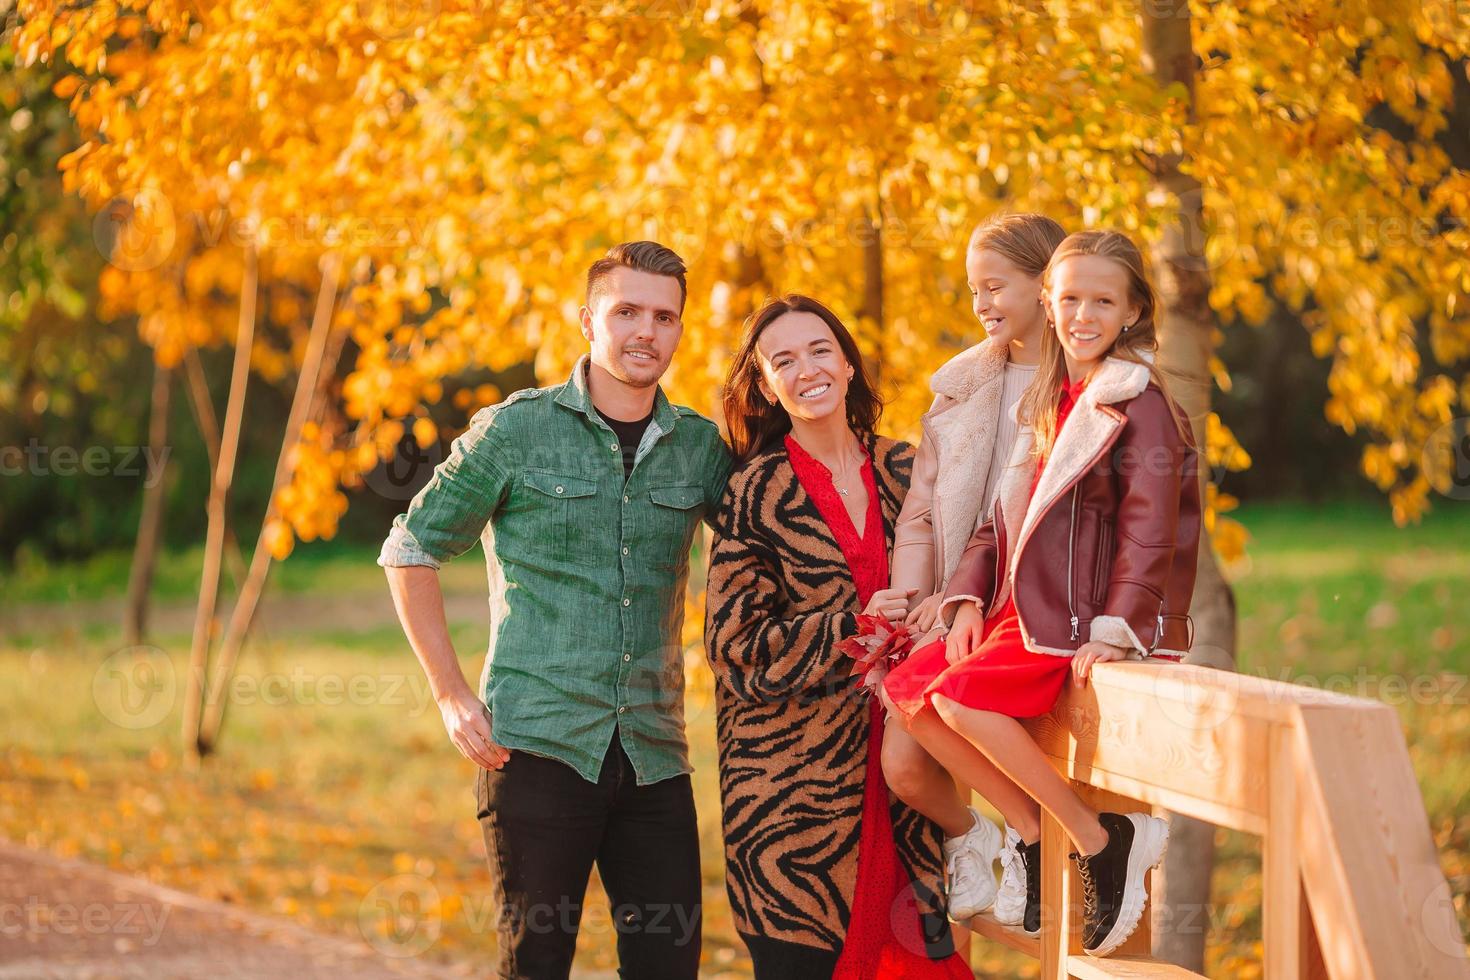 Portrait of happy family of four in autumn day photo